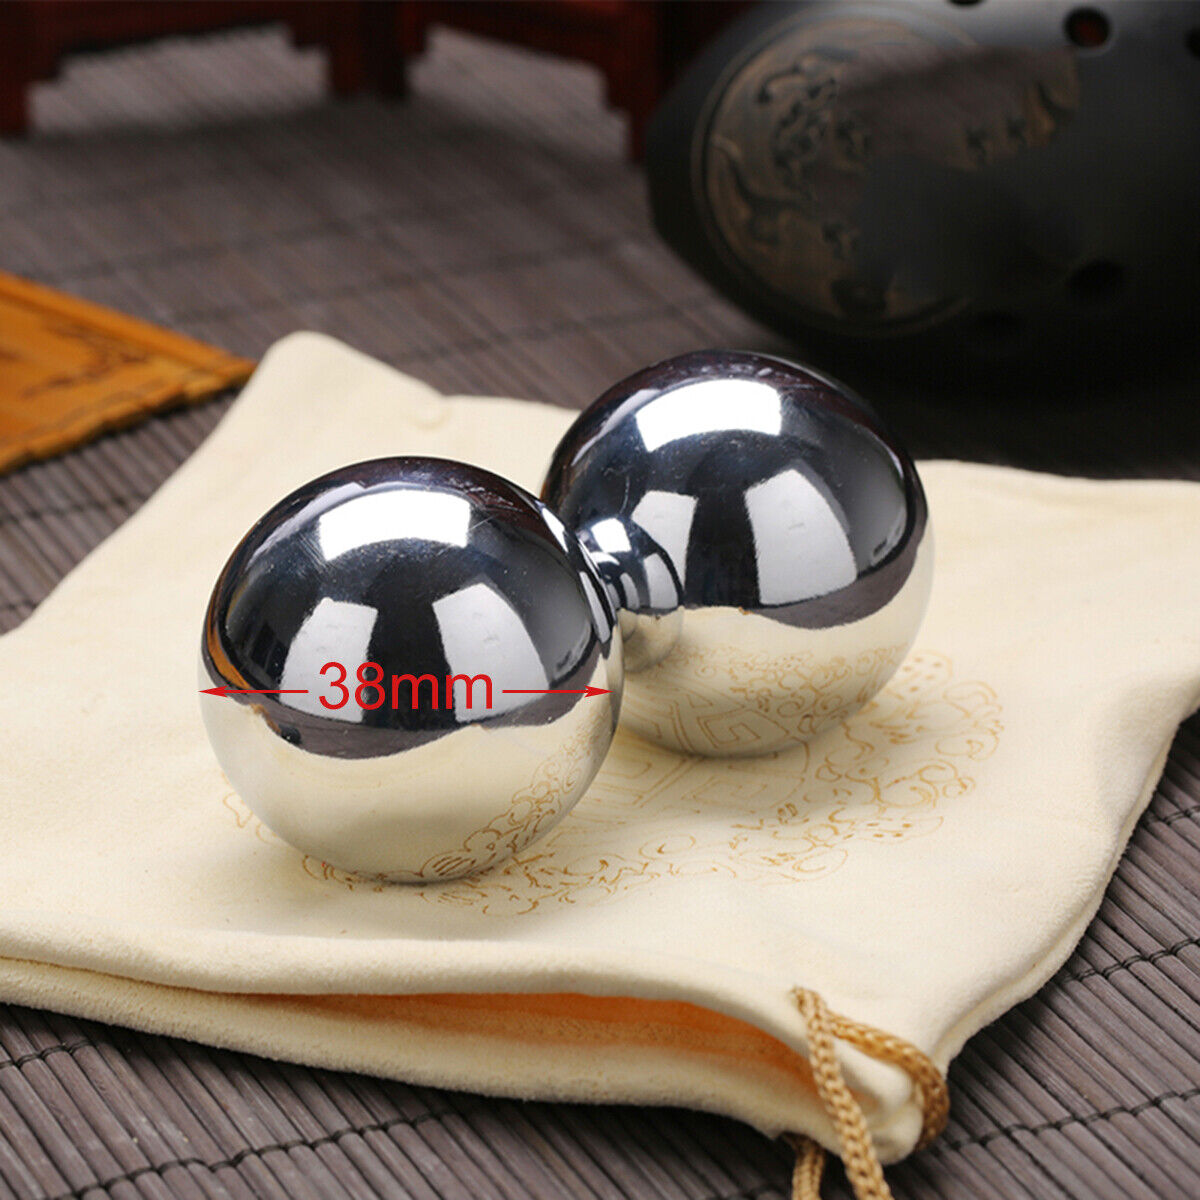 2x 38mm Chinese Baoding Balls Health Hand Exercise Stress Relaxation Therapy